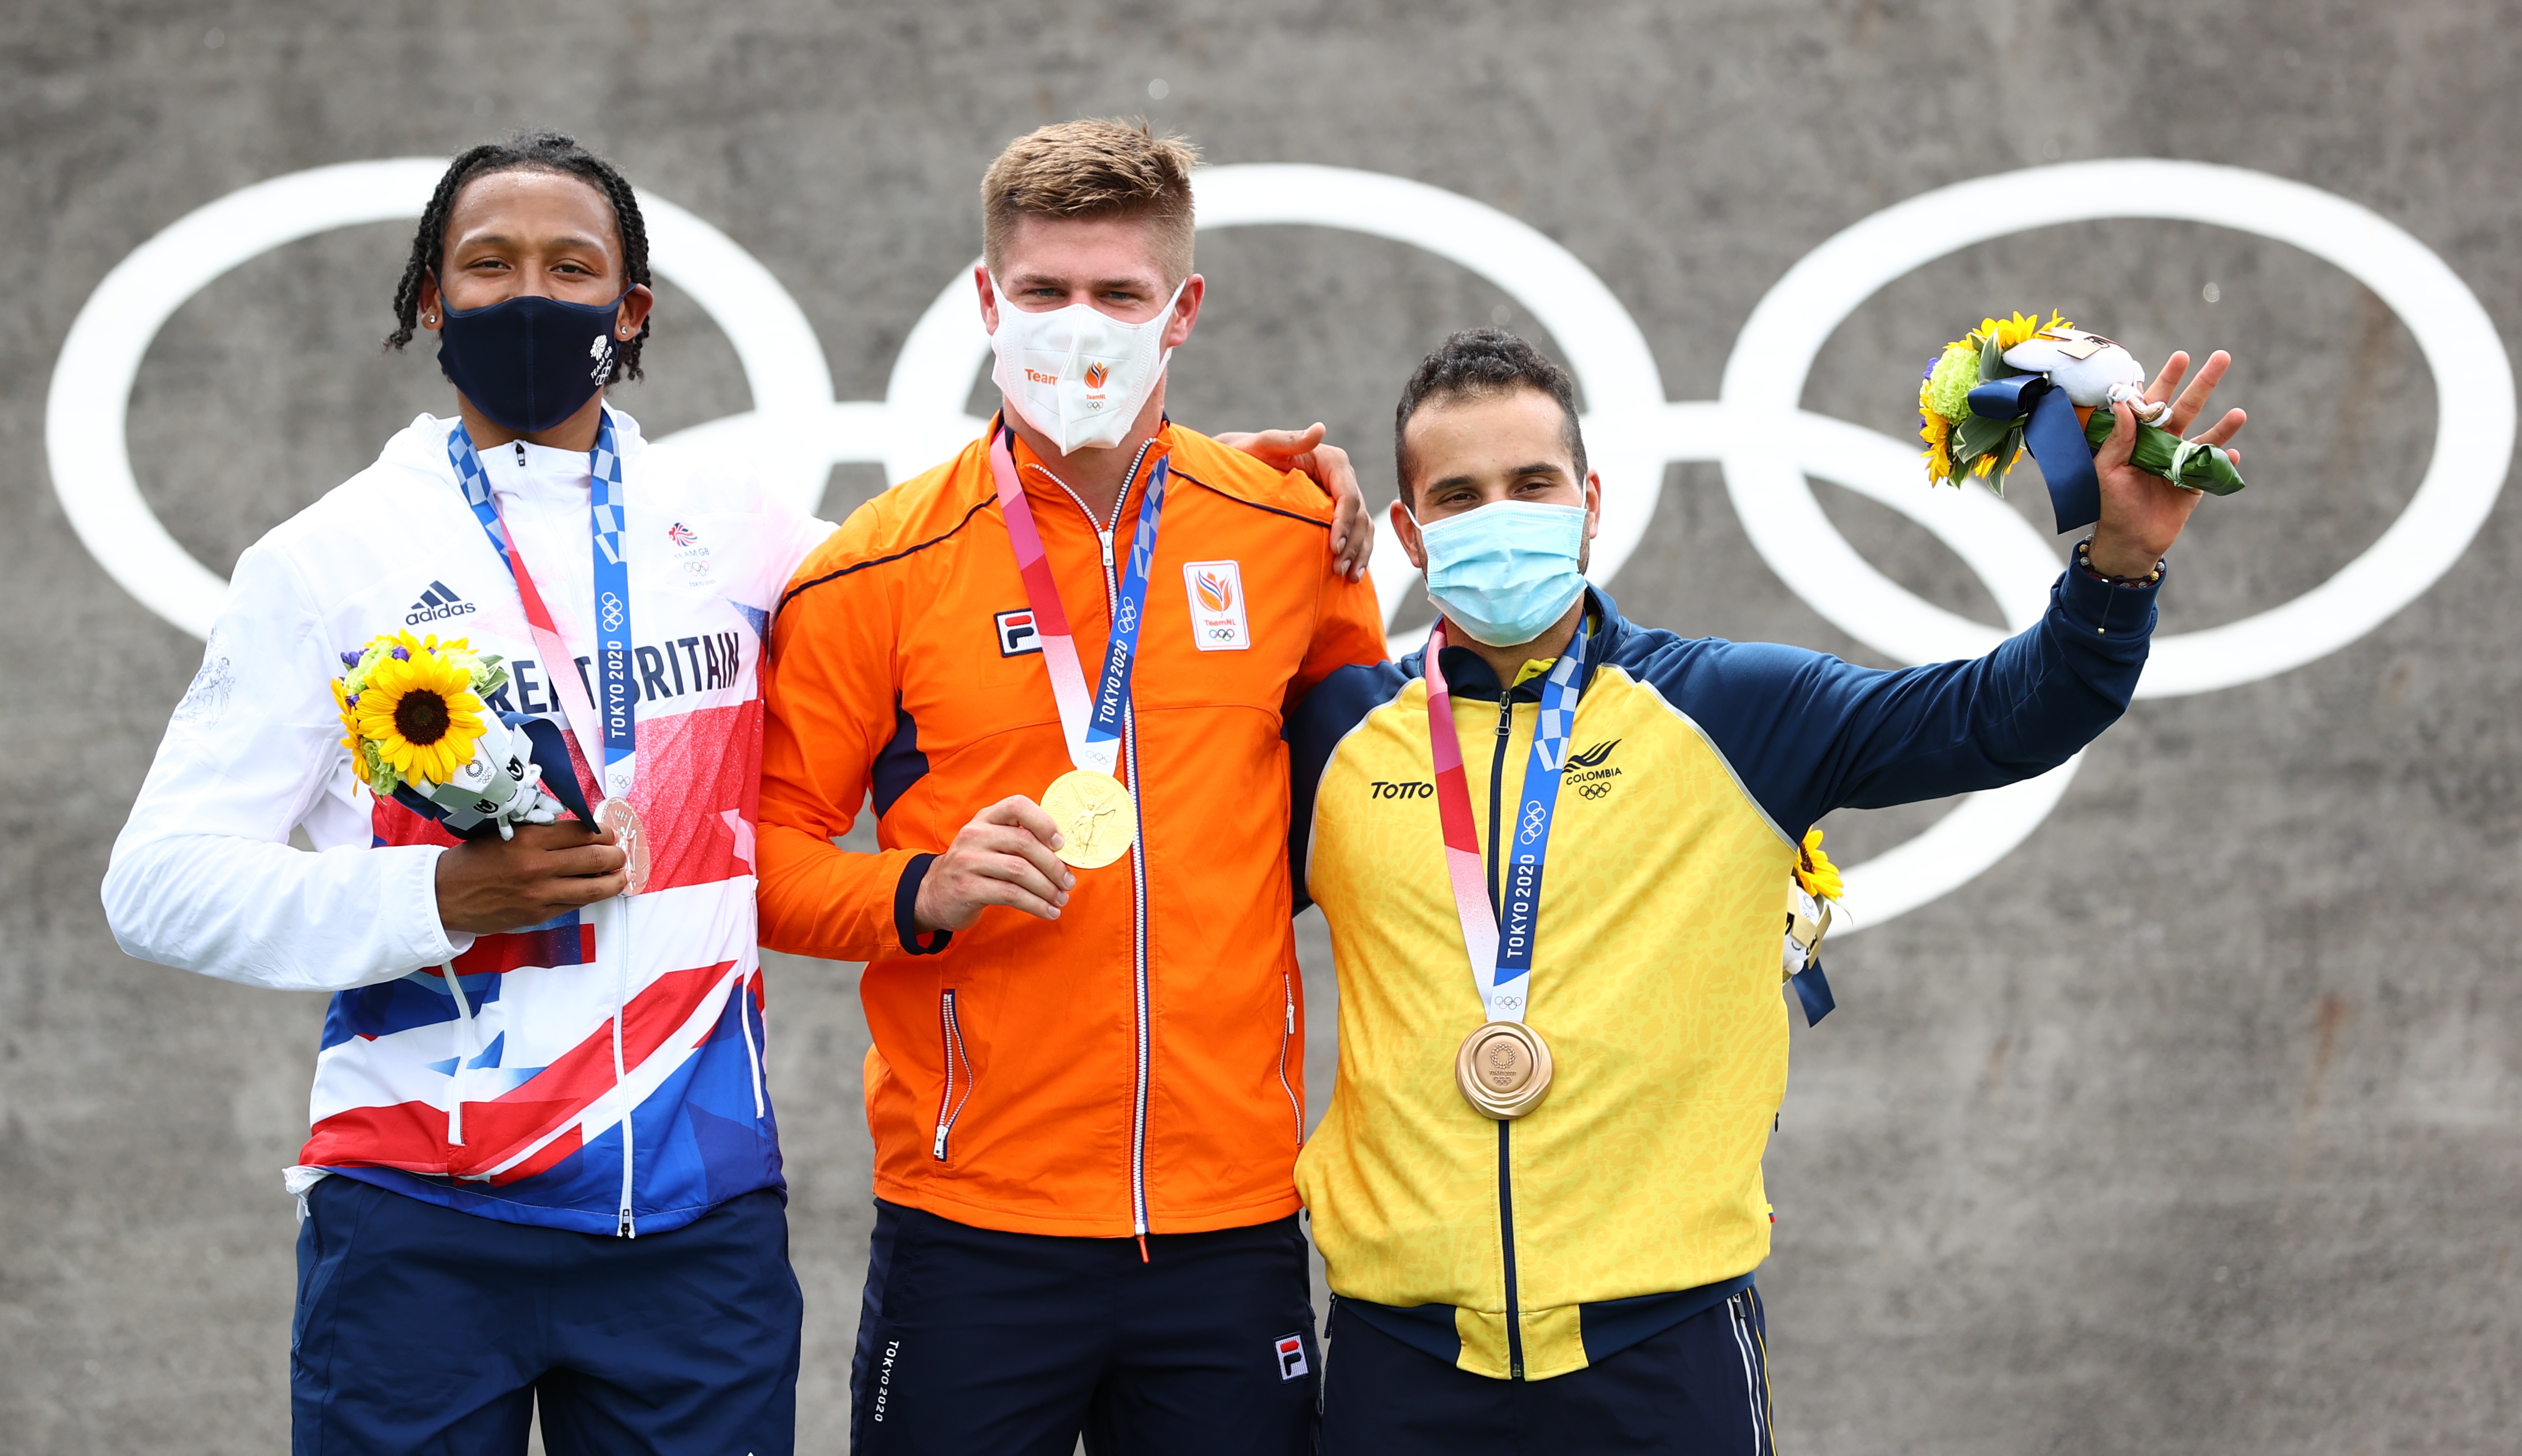 Tokyo 2020 Olympics - BMX Racing - Men's Individual - Medal Ceremony - AUP - Ariake Urban Sports Park, Tokyo, Japan - July 30, 2021. Gold medallist Niek Kimmann of the Netherlands celebrates with silver medallist, Kye Whyte of Britain and bronze medallist, Carlos Ramirez of Colombia. REUTERS/Matthew Childs